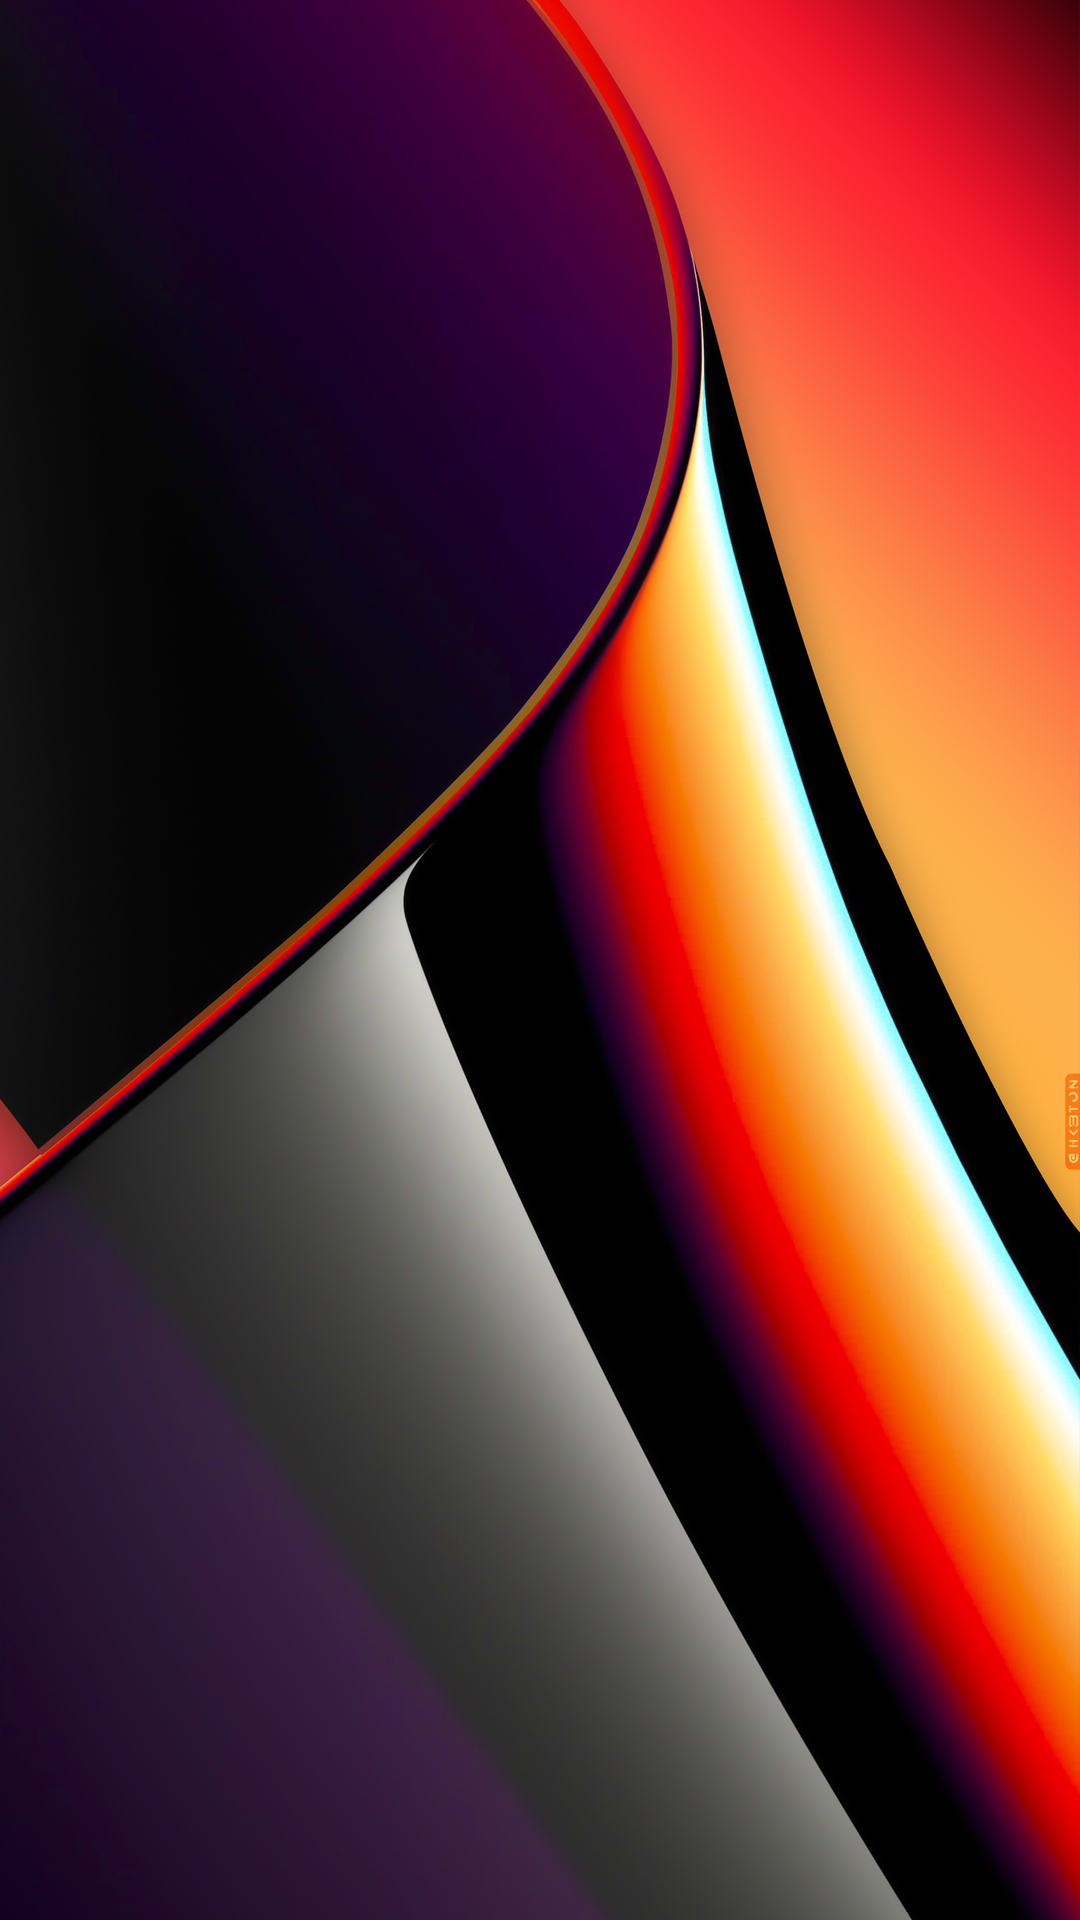 1080x1920 Macos Monterey Abstract 4k Iphone 7,6s,6 Plus, Pixel xl ,One Plus  3,3t,5 HD 4k Wallpapers, Images, Backgrounds, Photos and Pictures